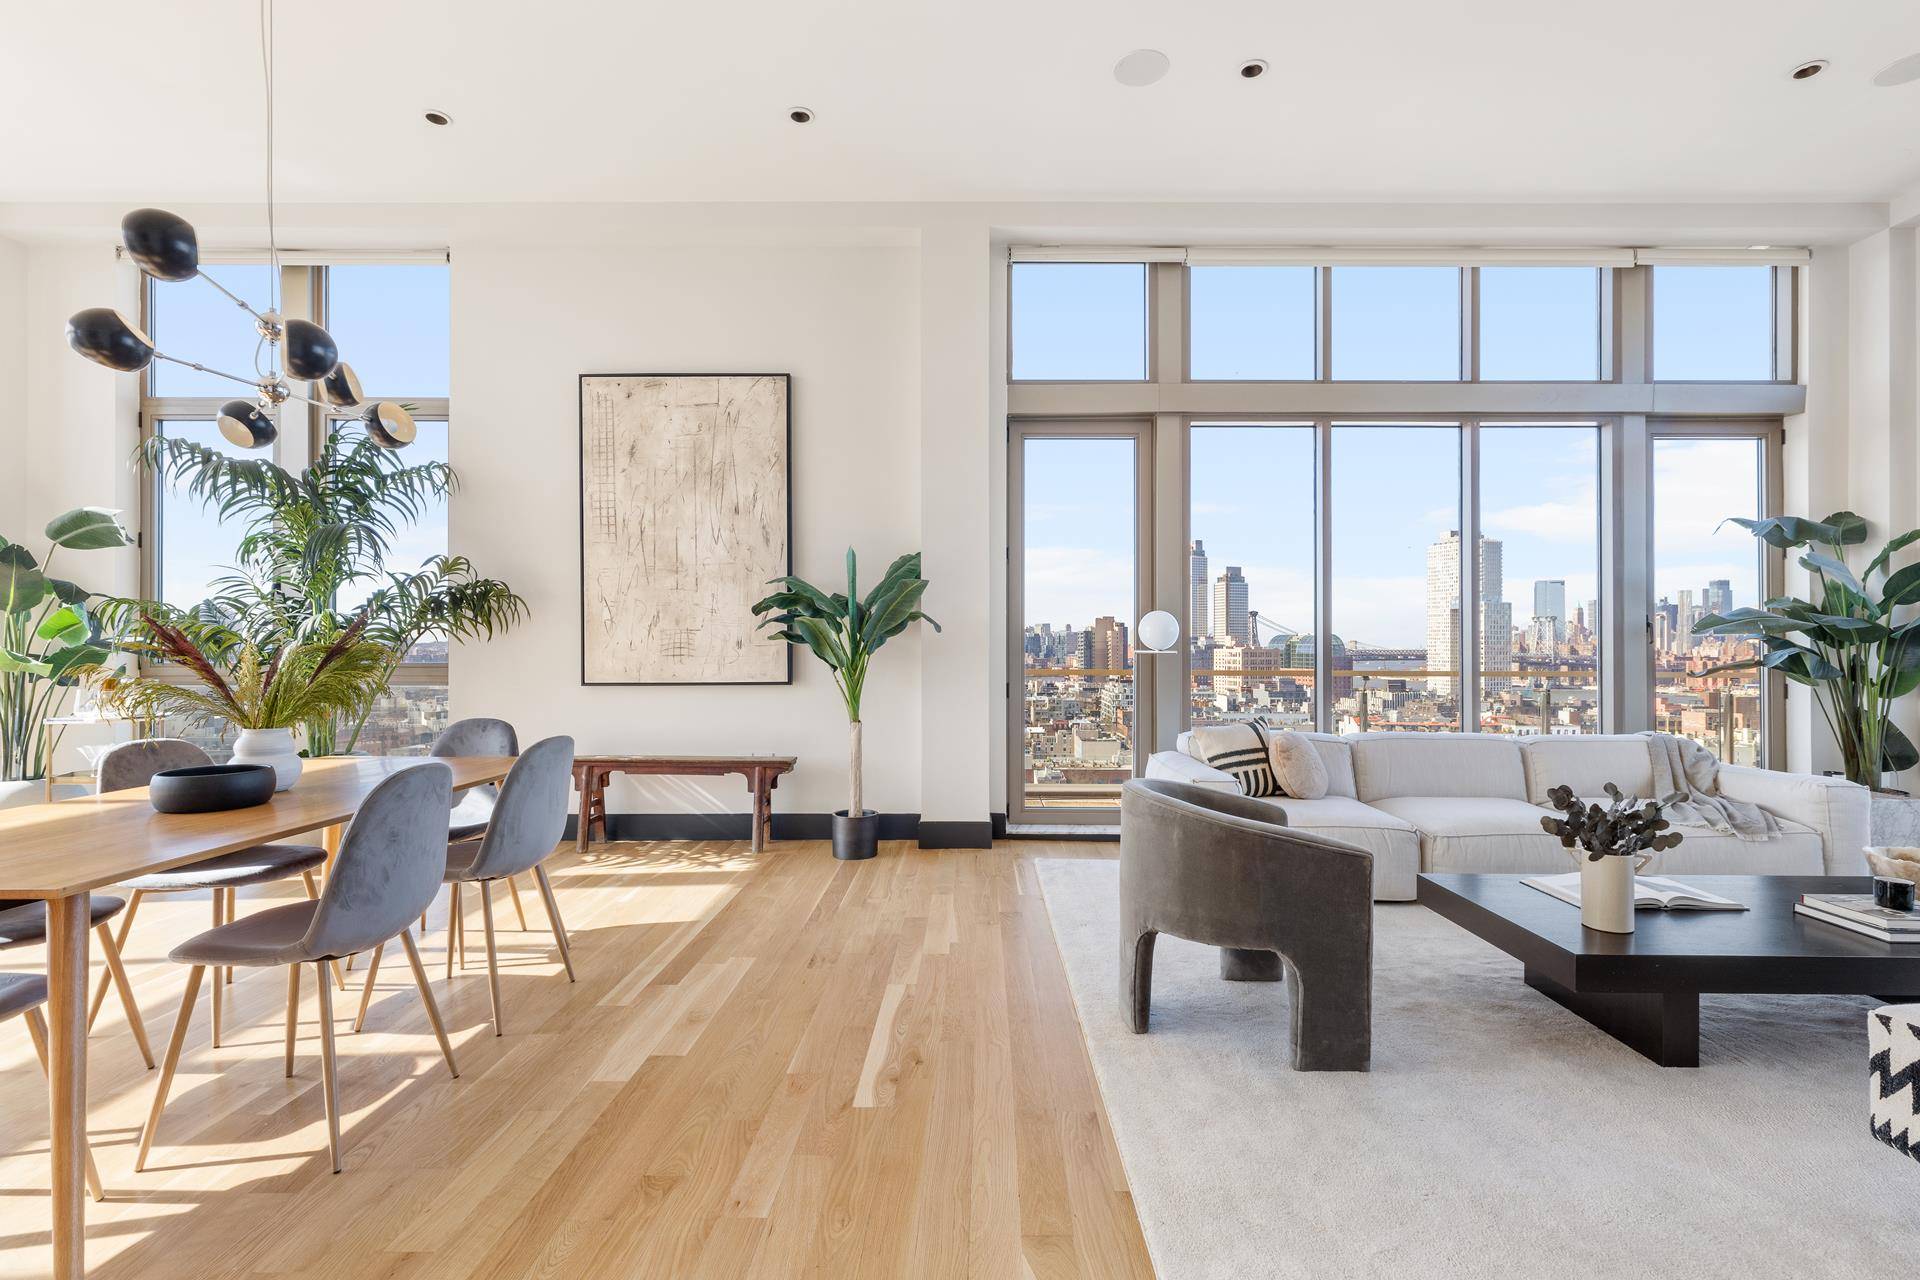 One of the most impressive homes in Williamsburg awaits !